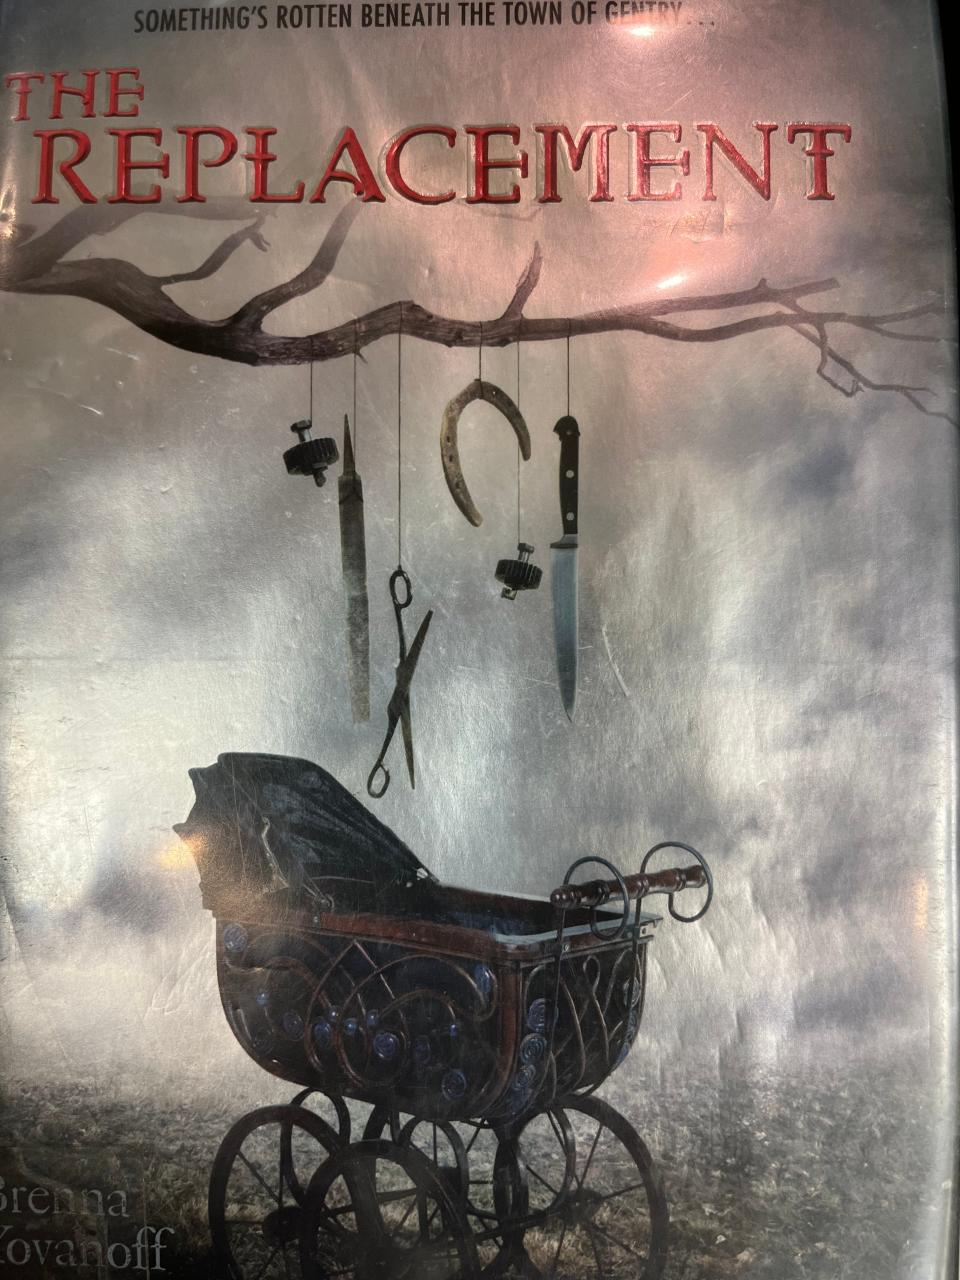 "The Replacement" book cover.